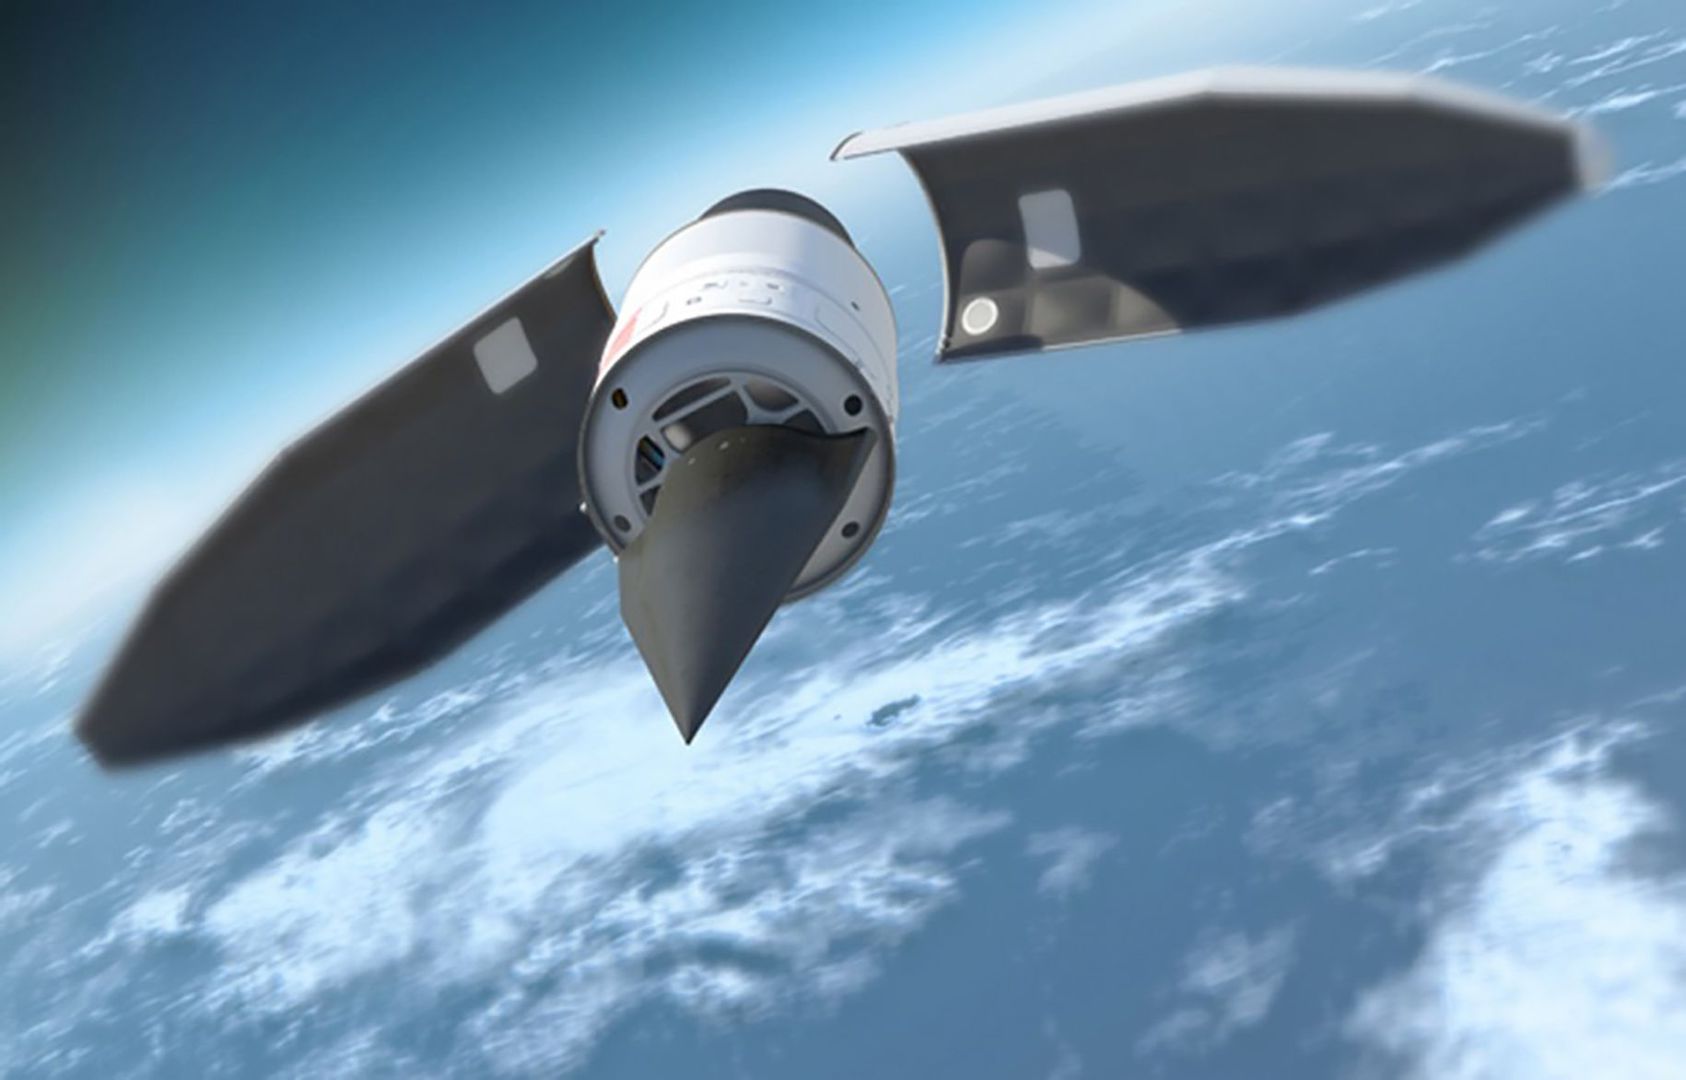 congressional research service report hypersonic weapons